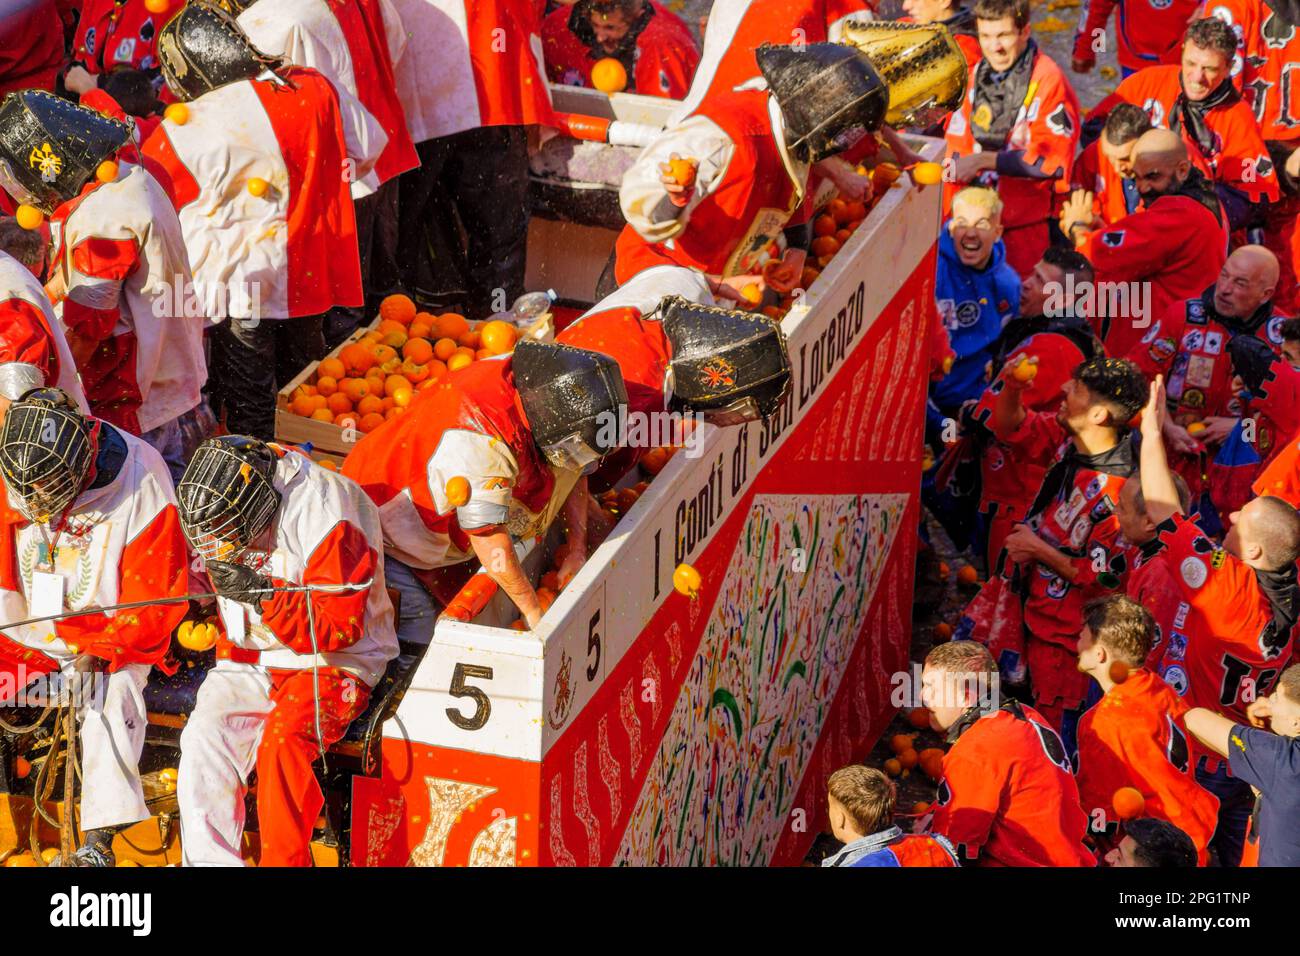 Ivrea, Italy - February 19, 2023: Groups in traditional dressings, and crowd with red hats, take part in the Battle of the Oranges, part of the histor Stock Photo